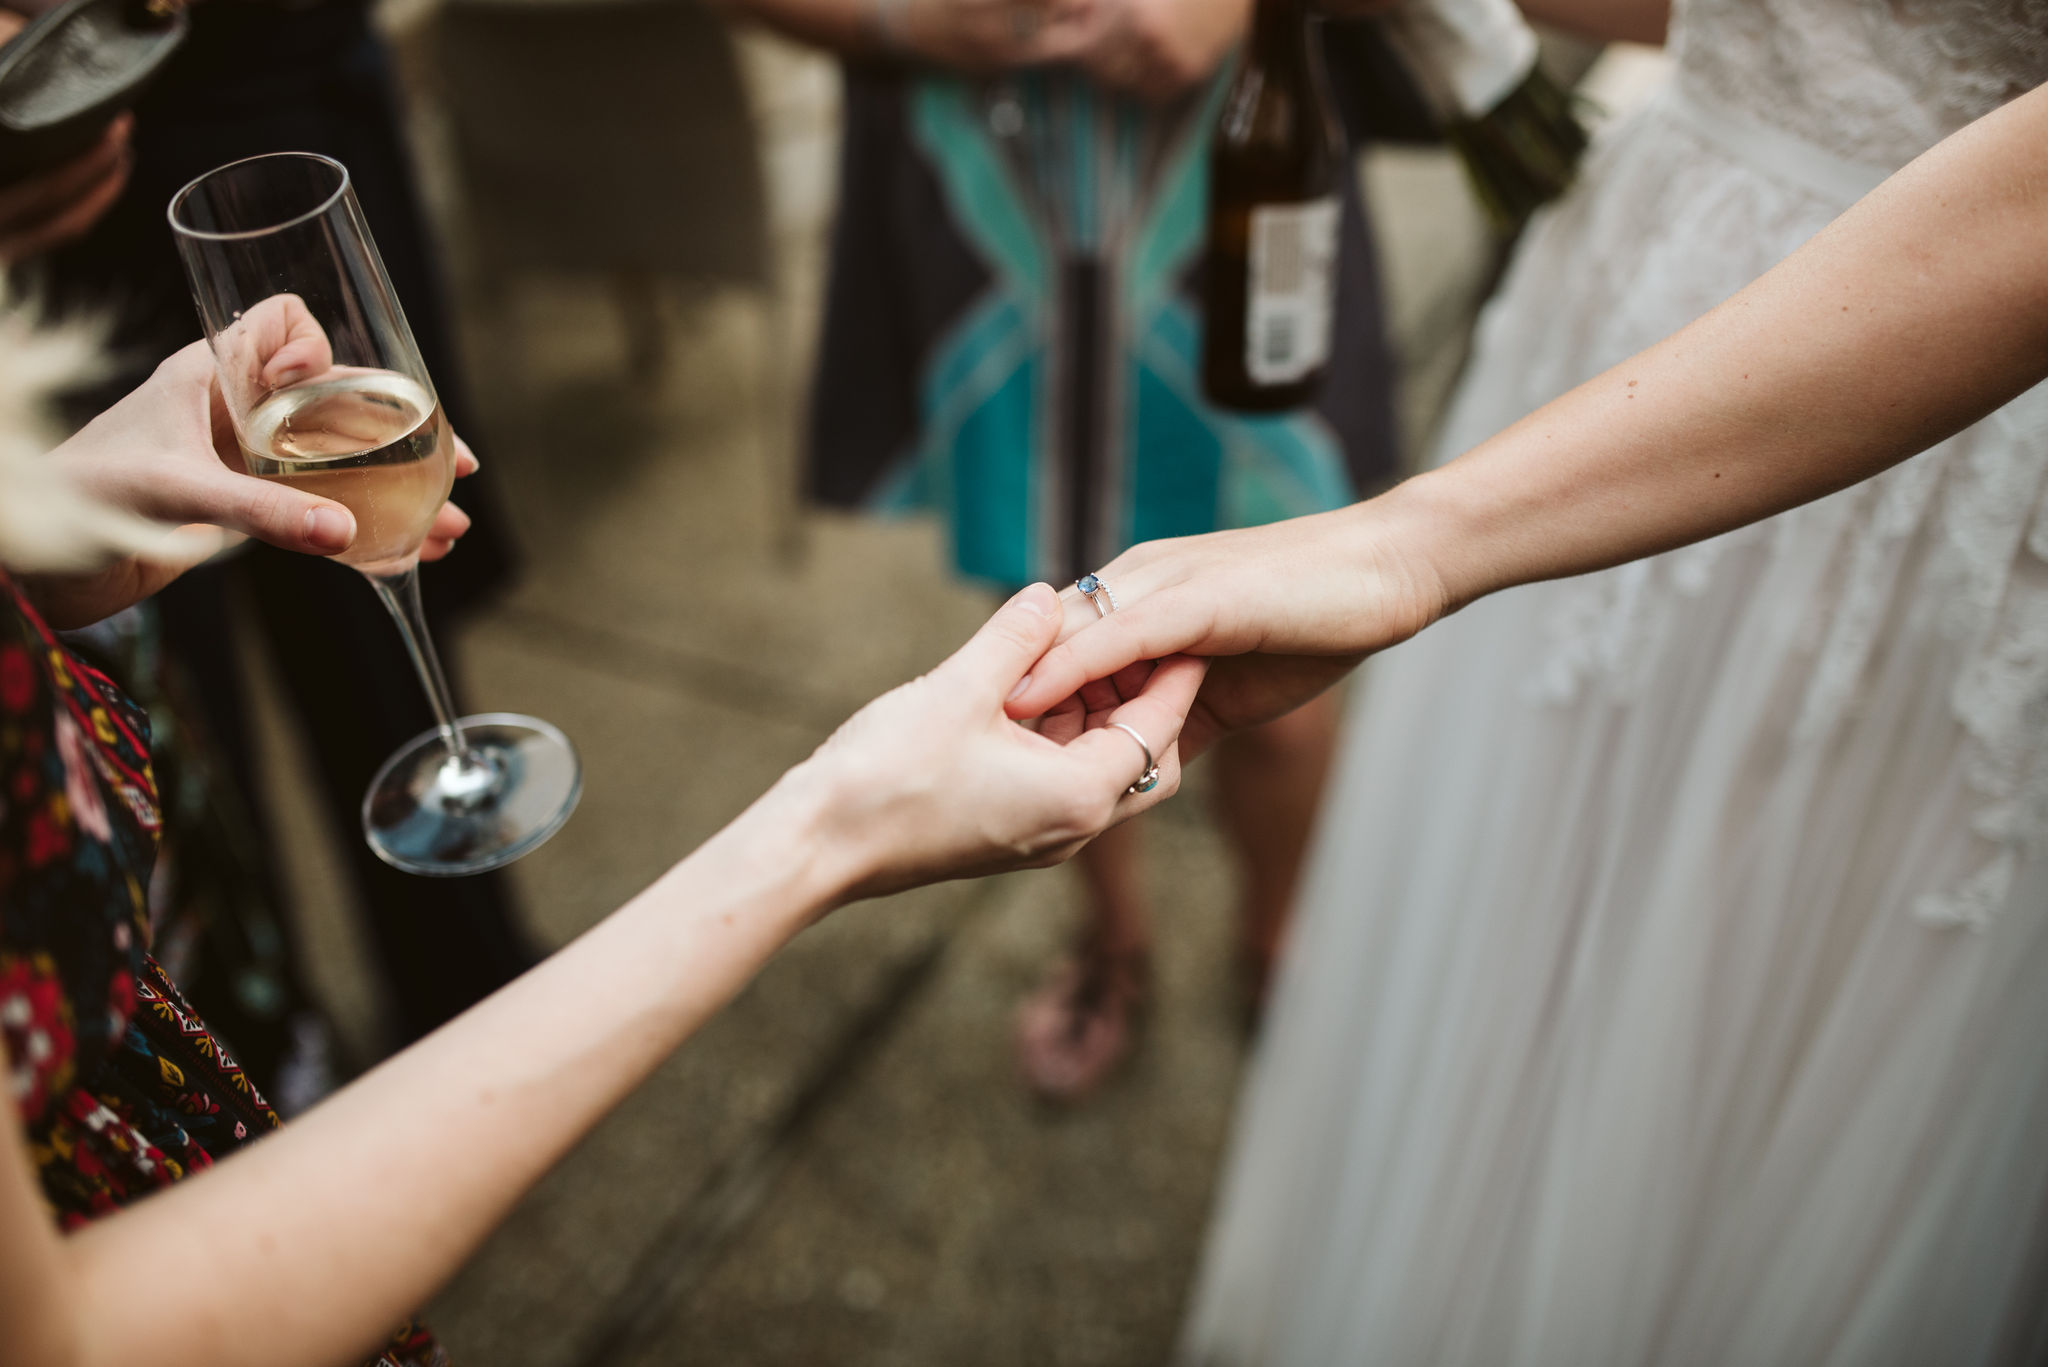  Phoenix Maryland, Baltimore Wedding Photographer, Eagle’s Nest Country Club, Classic, Romantic, Spring, Bride Holding Hands with Friend, Wedding Guests Admiring Brilliant Earth Rings 